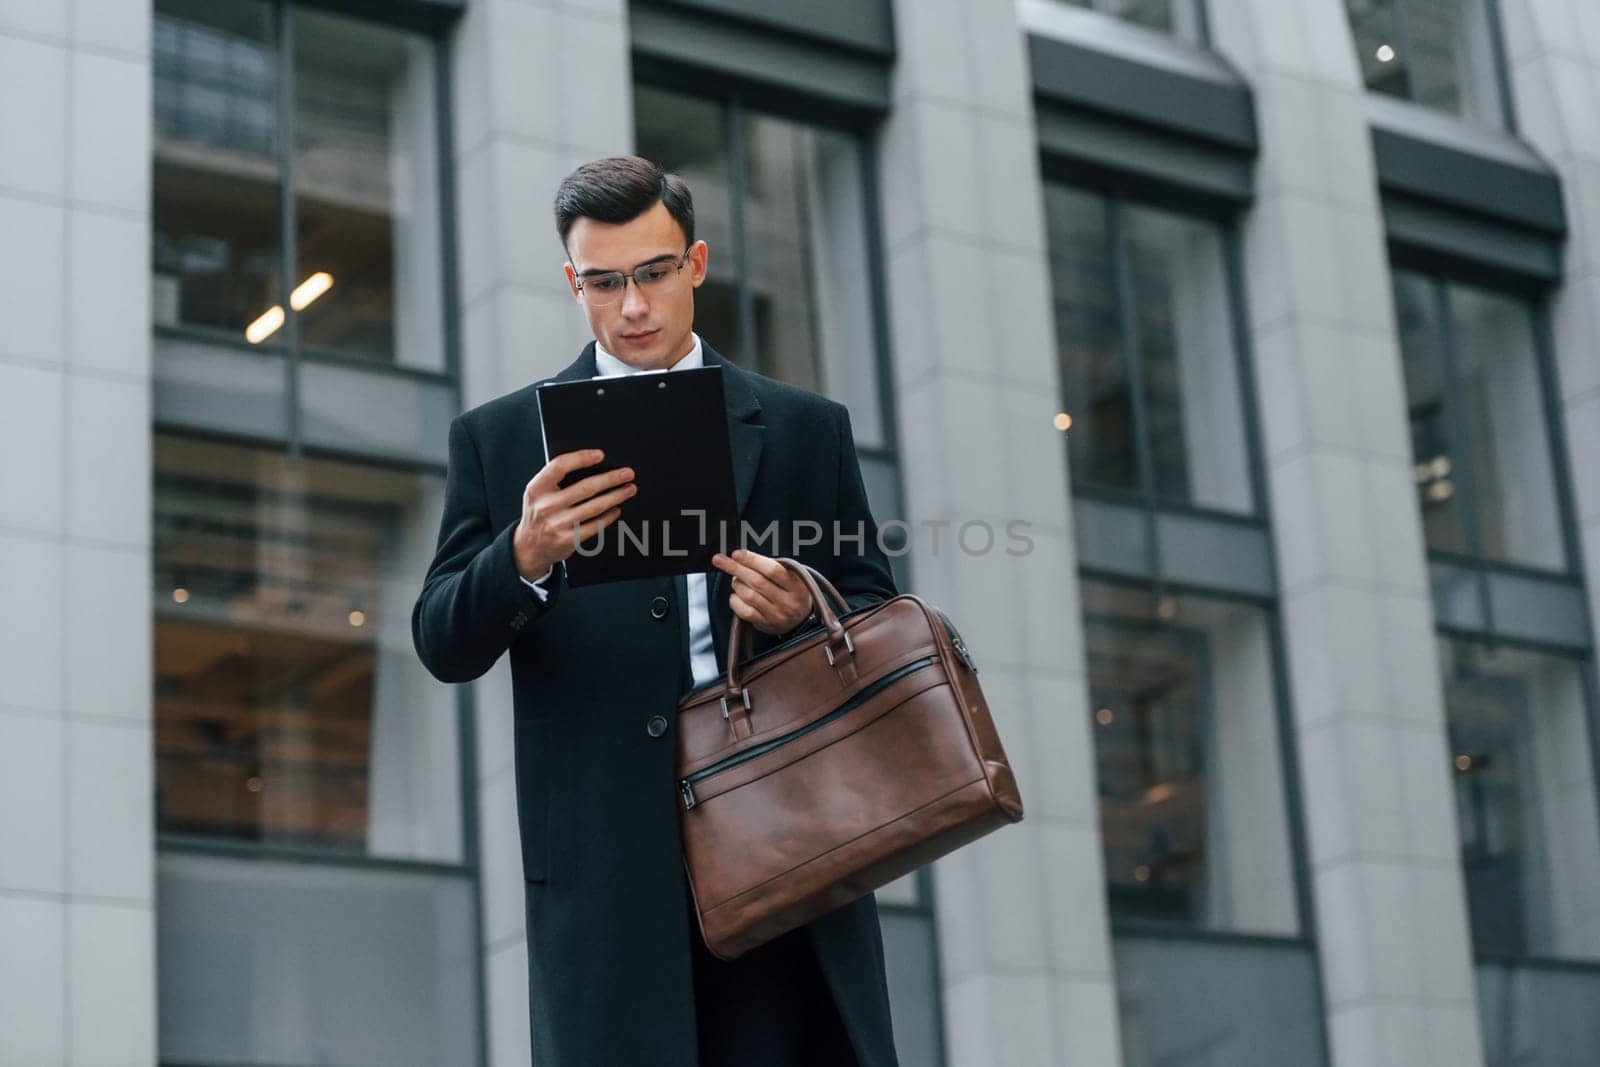 With brown bag. Businessman in black suit and tie is outdoors in the city.